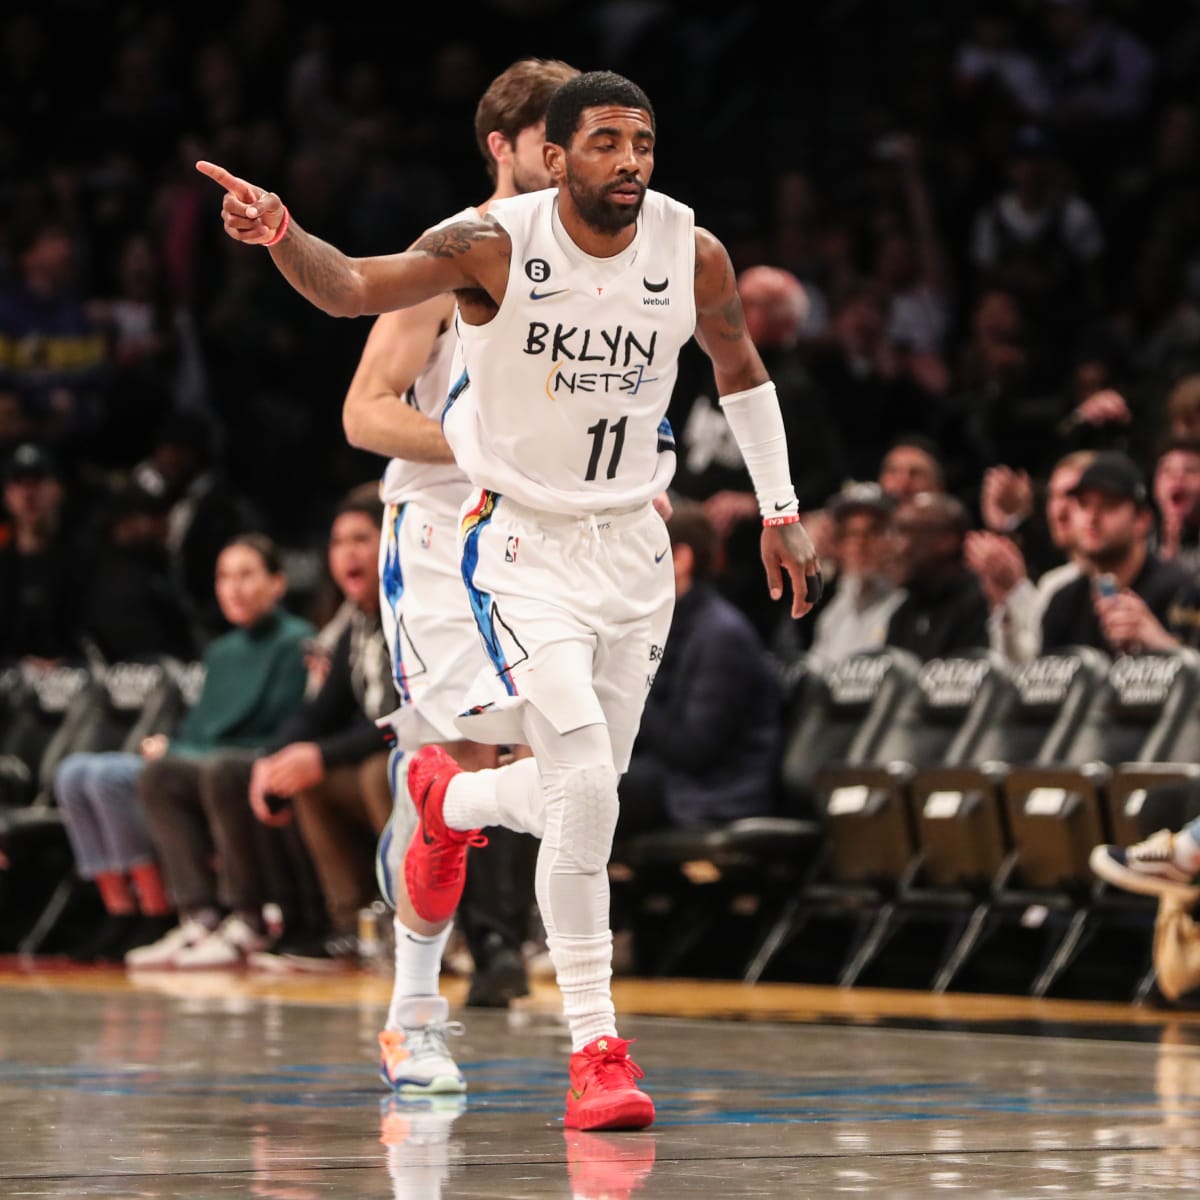 Nets vs Hornets: Kyrie switches shoes covering Nike logo